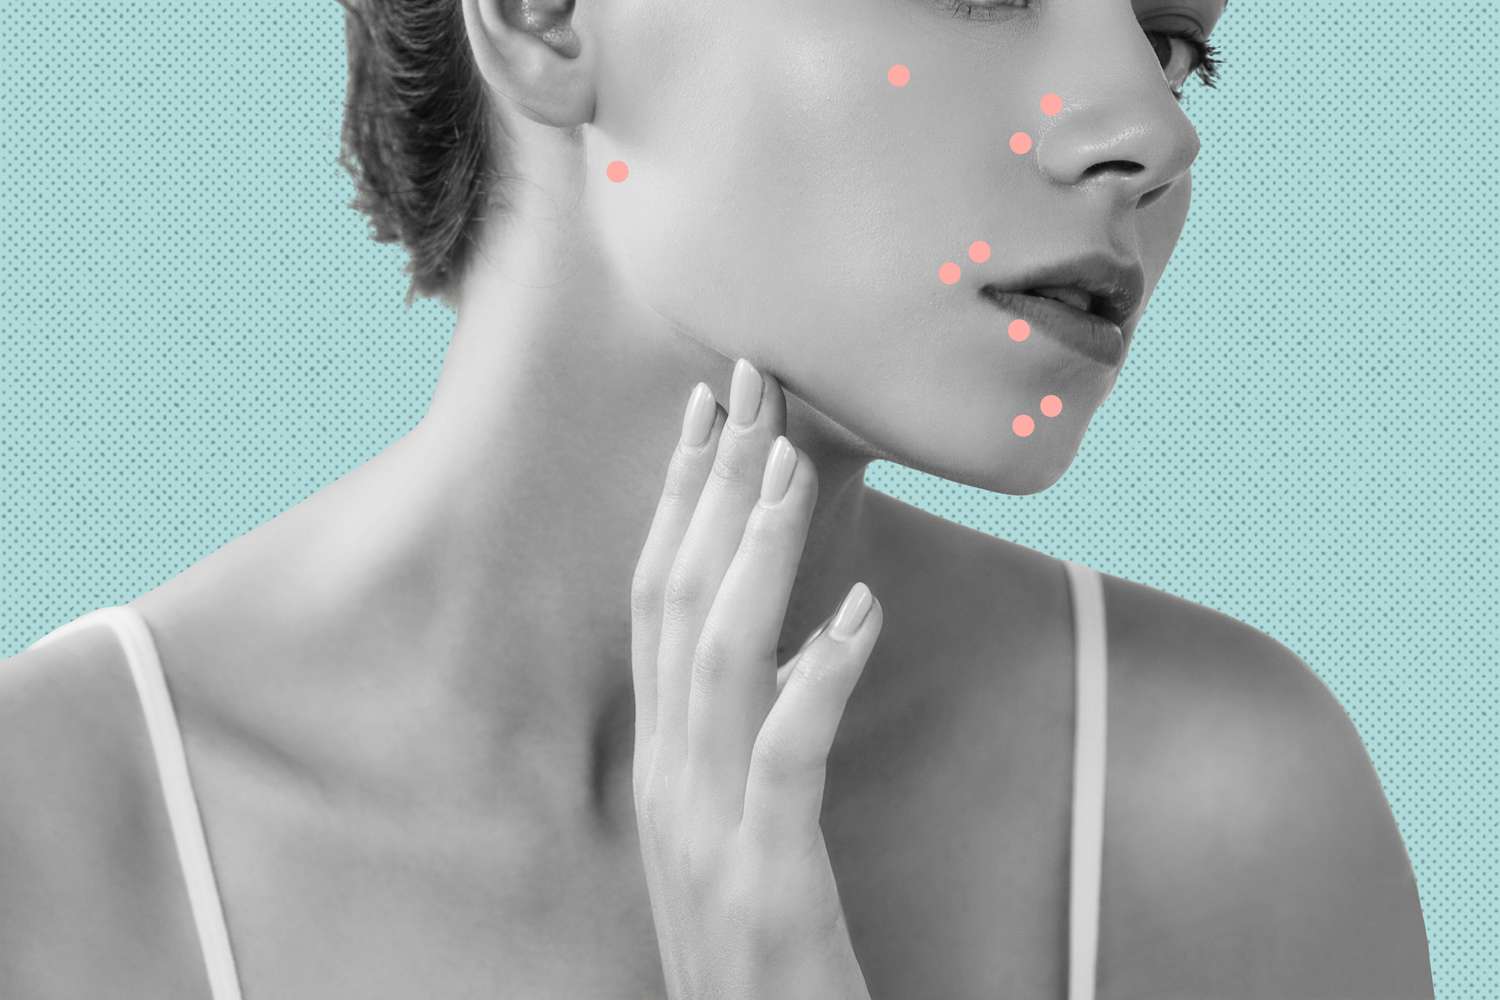 illustration of mom with acne pimples on face